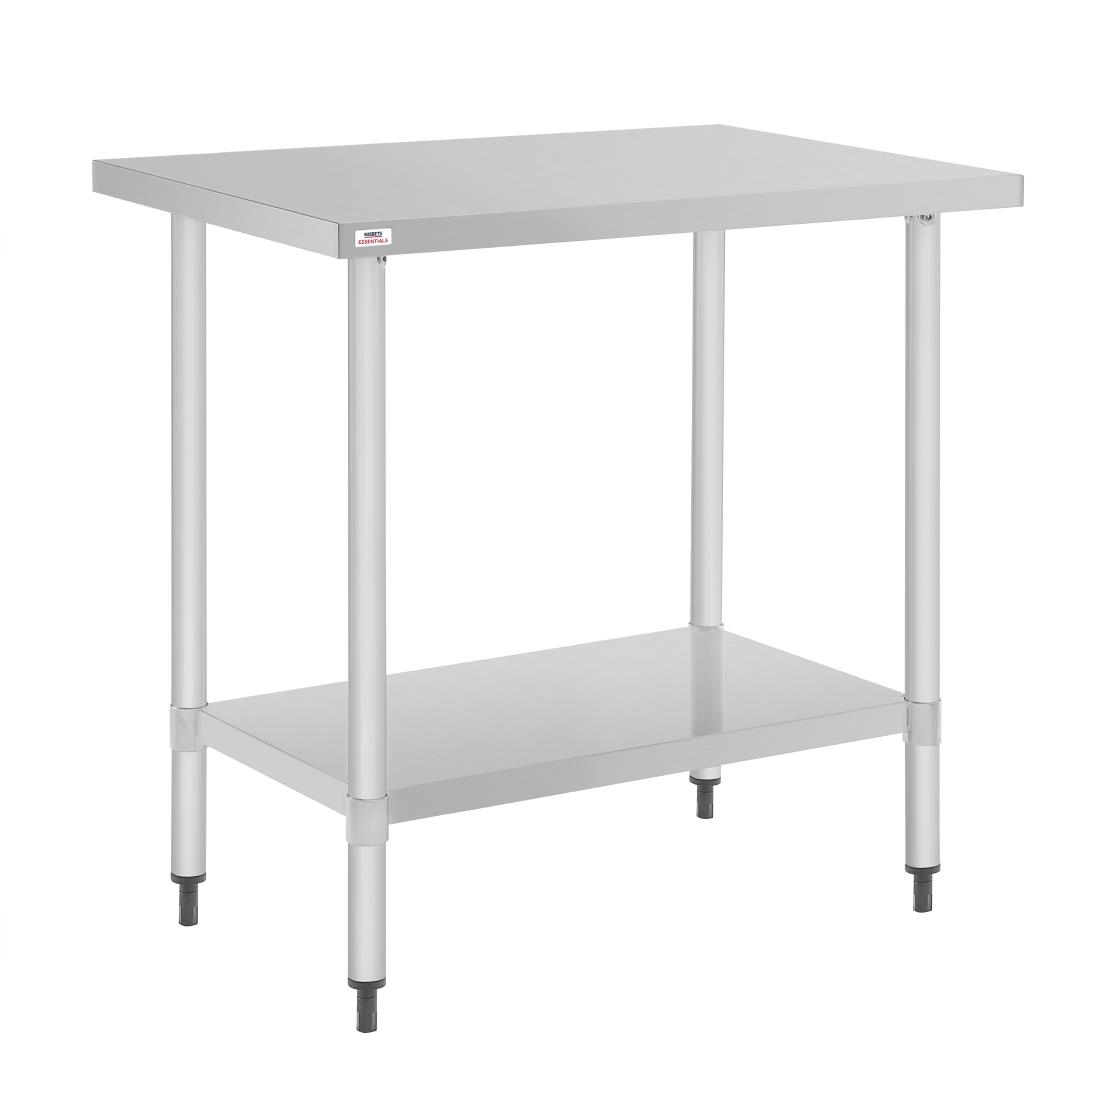 Nisbets Essentials Self Assembly Stainless Steel Table 800 x 600mm